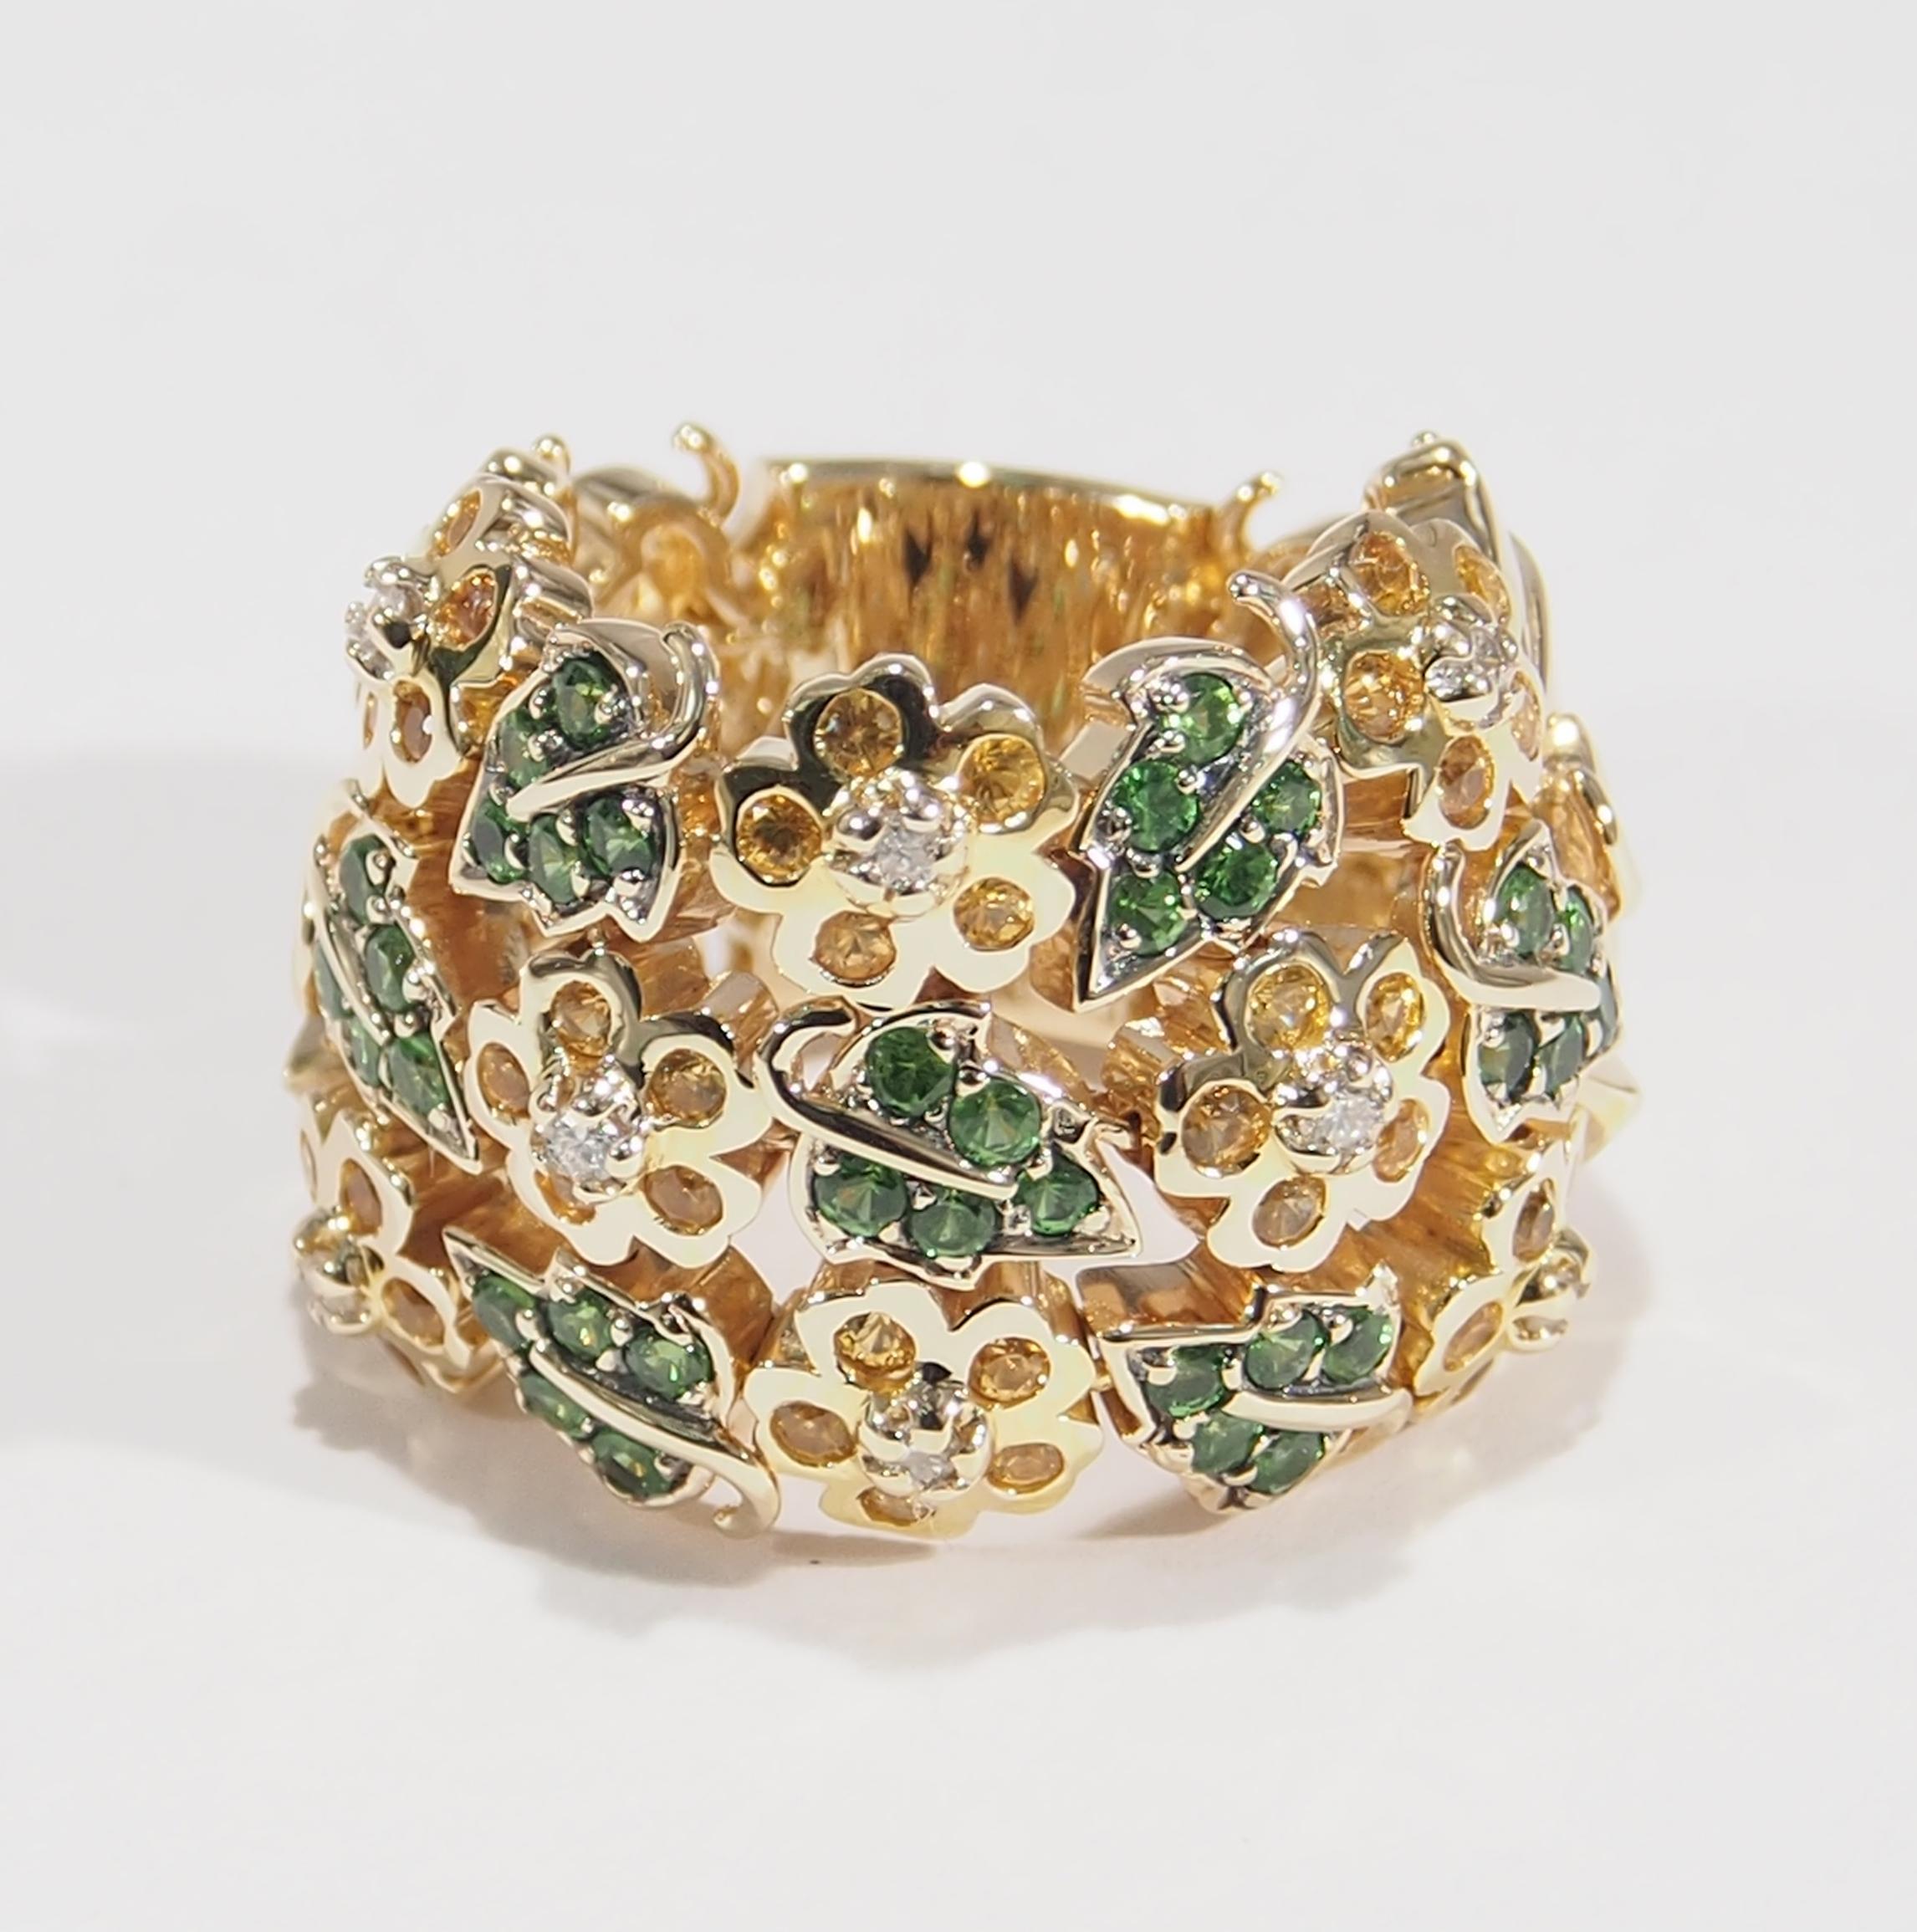 This is a delightful 14K Yellow Gold Band designed with Flexible Leaves and Flowers surrounding the finger. The leaves are accented with (35) Tsavorites, 0.70ctw, sprinkling with (40) Yellow Sapphire Flowers, 0.80ctw. that have (8) Round Brilliant